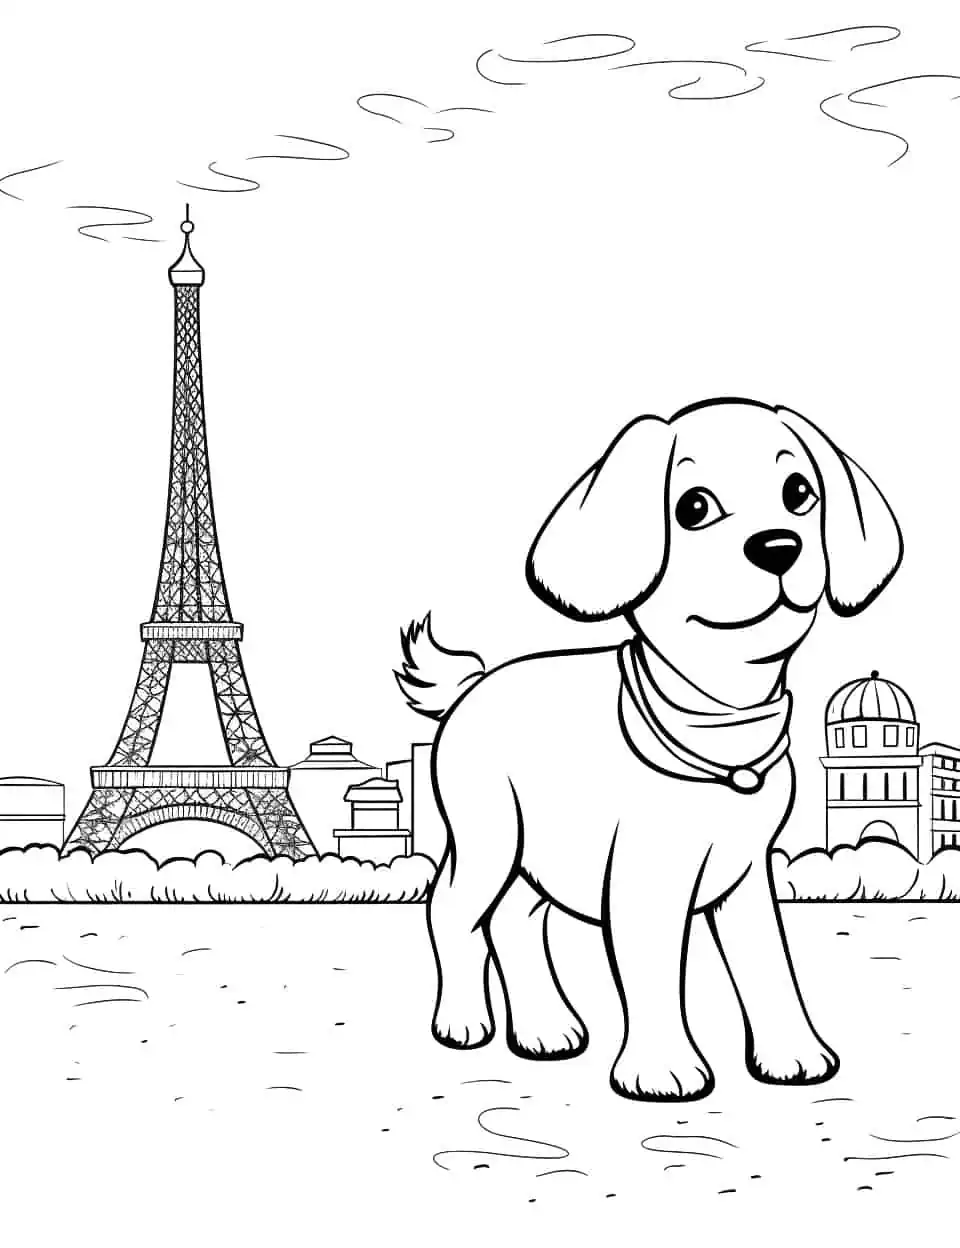 Poodle in Paris Dog Coloring Page - A chic poodle strolling in front of the Eiffel Tower.